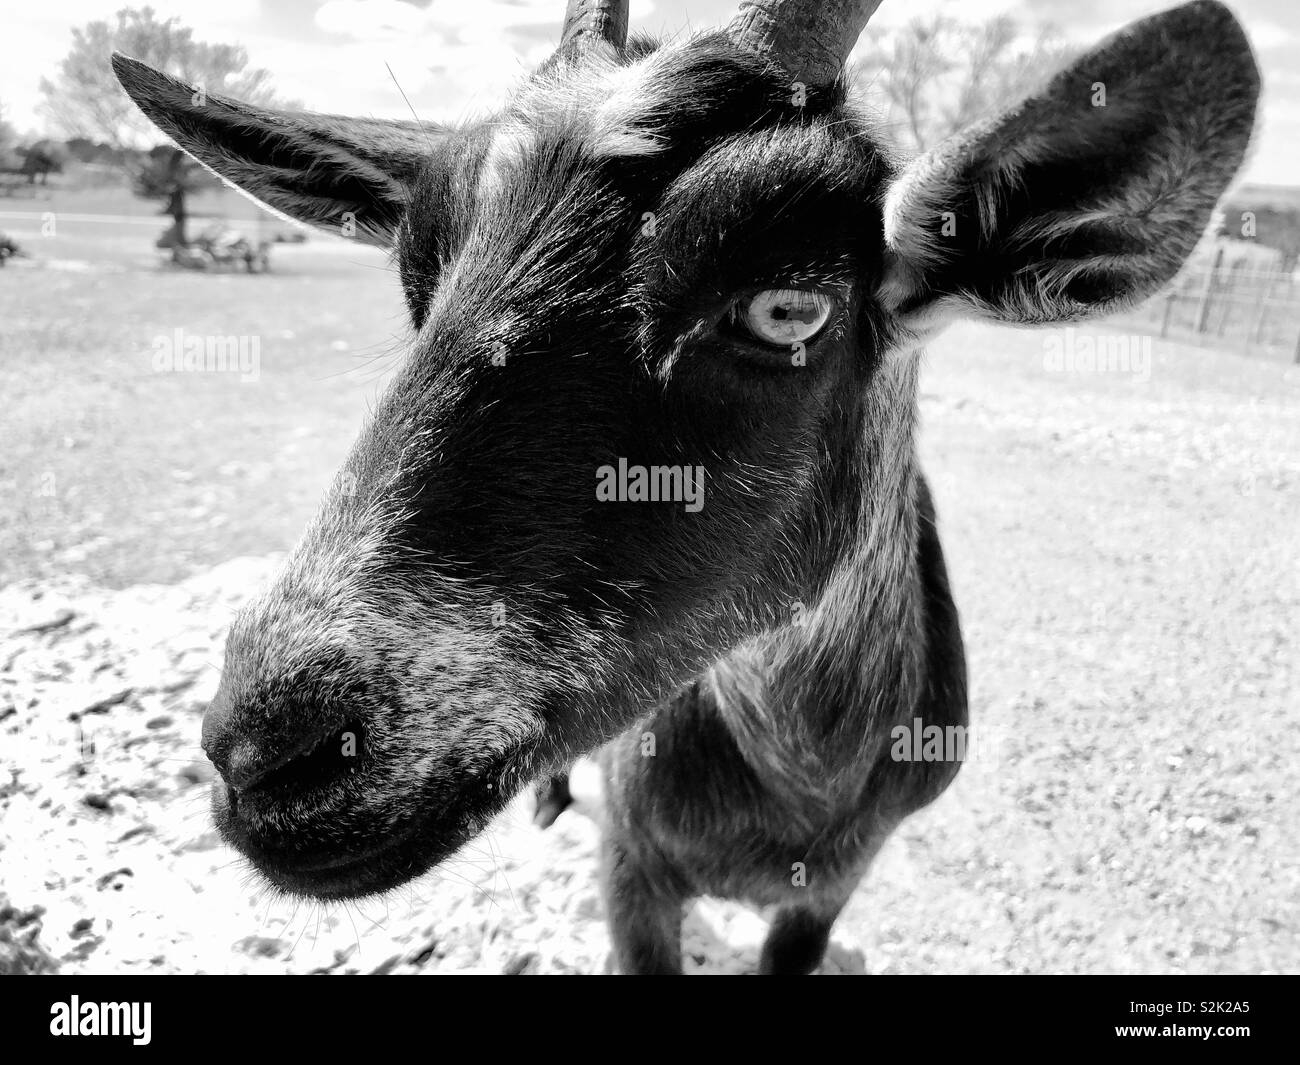 Black and white image of a goat Stock Photo